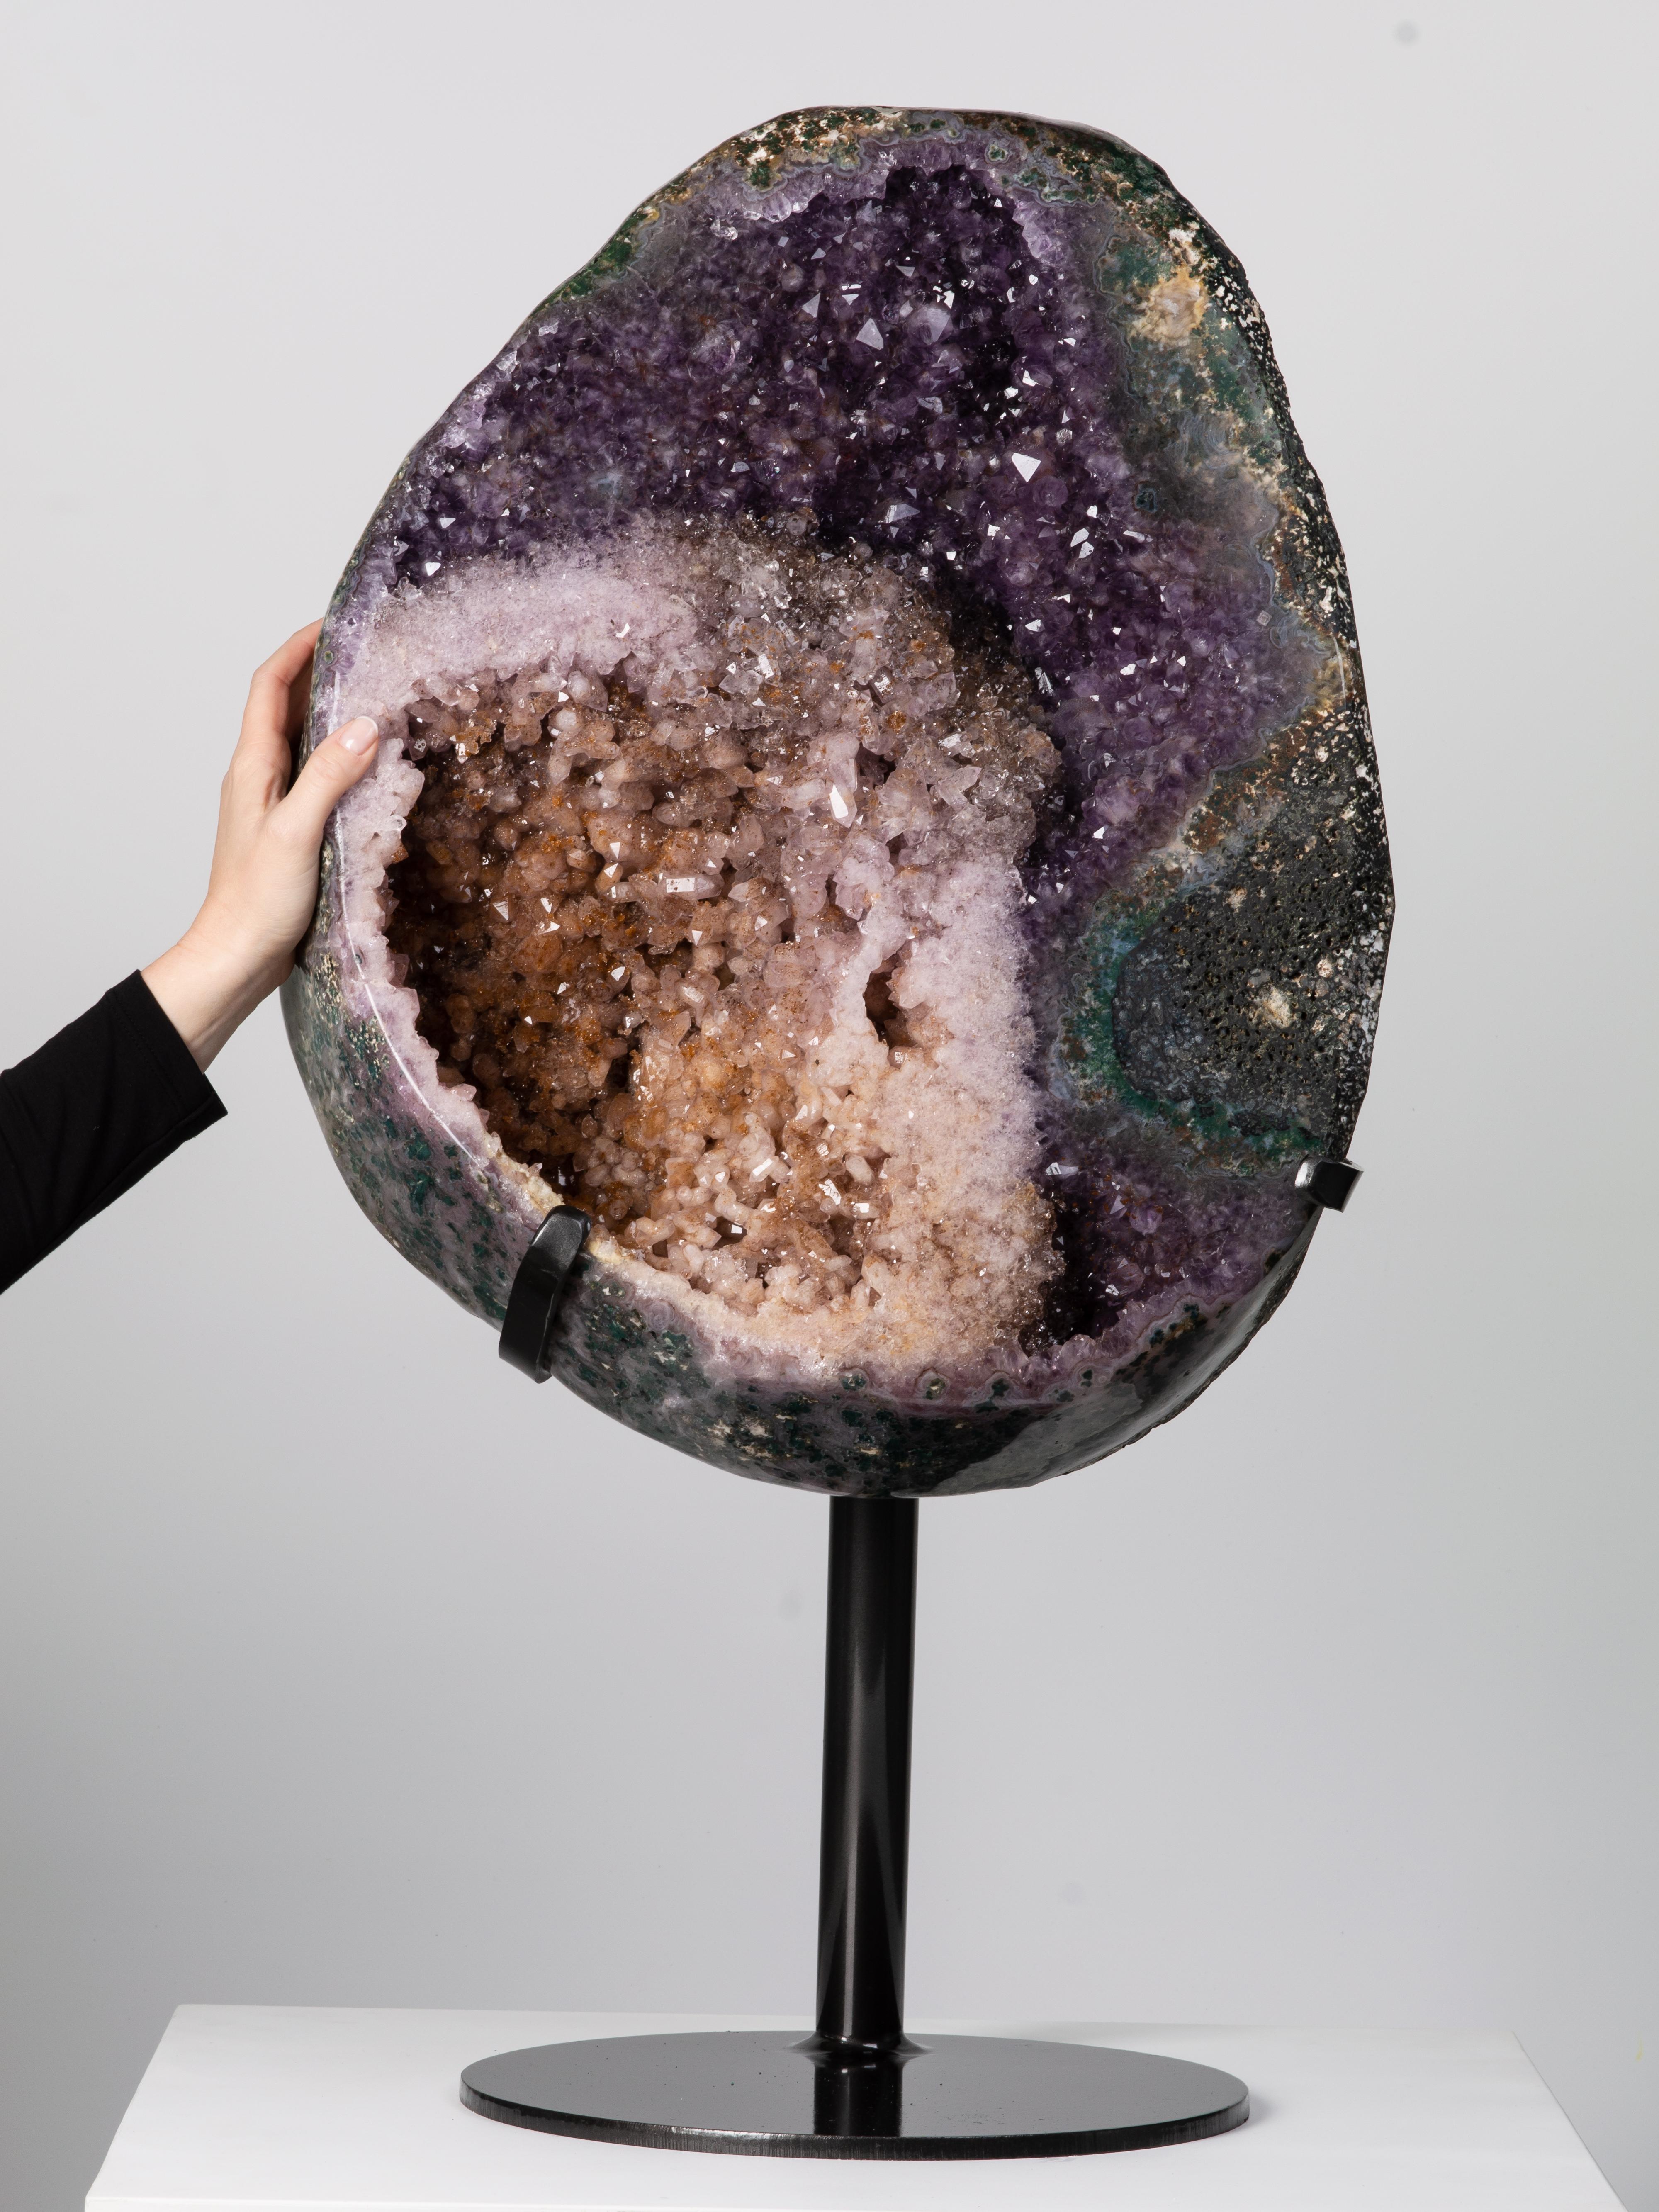 This large and thick slice preserves a complex arrangement of two interlocking
geodes, one with a citrine-like orange quartz and another with
deep purple amethyst. The exterior green celadonite “shell” of the geode
can be appreciated in rough as